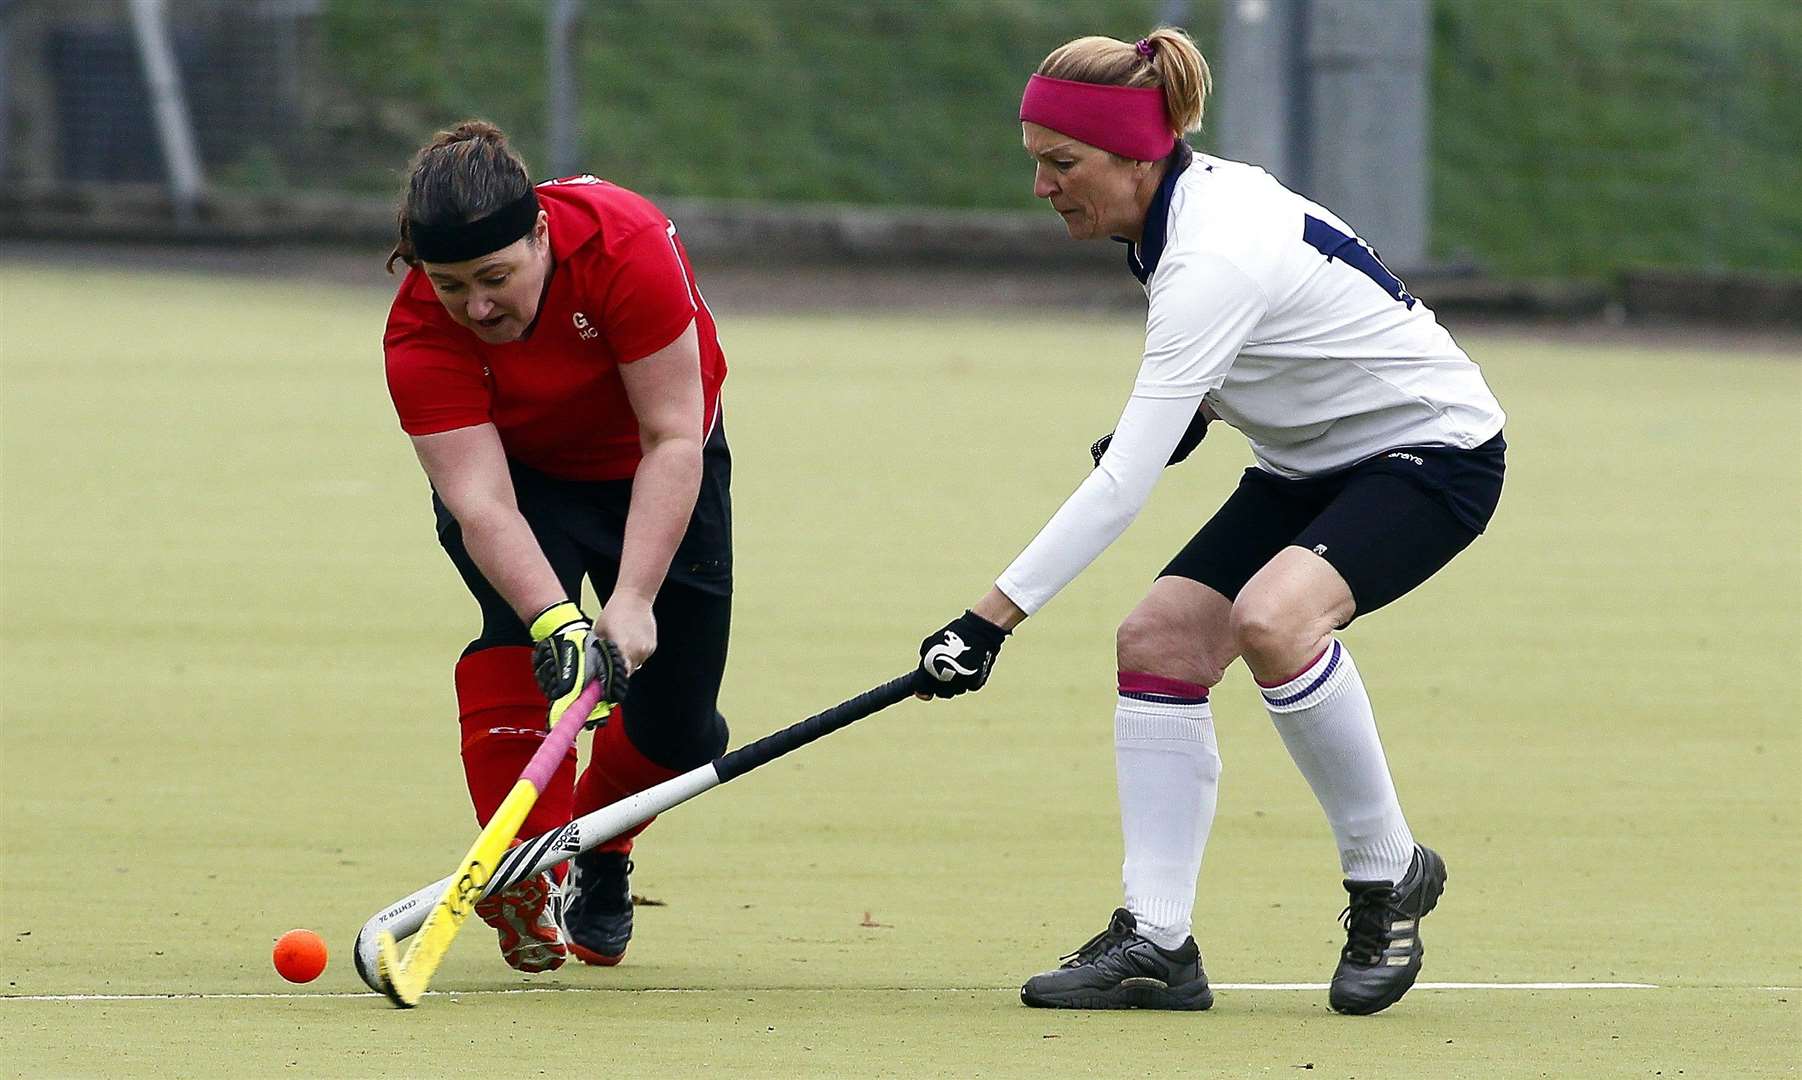 Hopes are high that hockey will continue to be played in Gravesend Picture: Sean Aidan